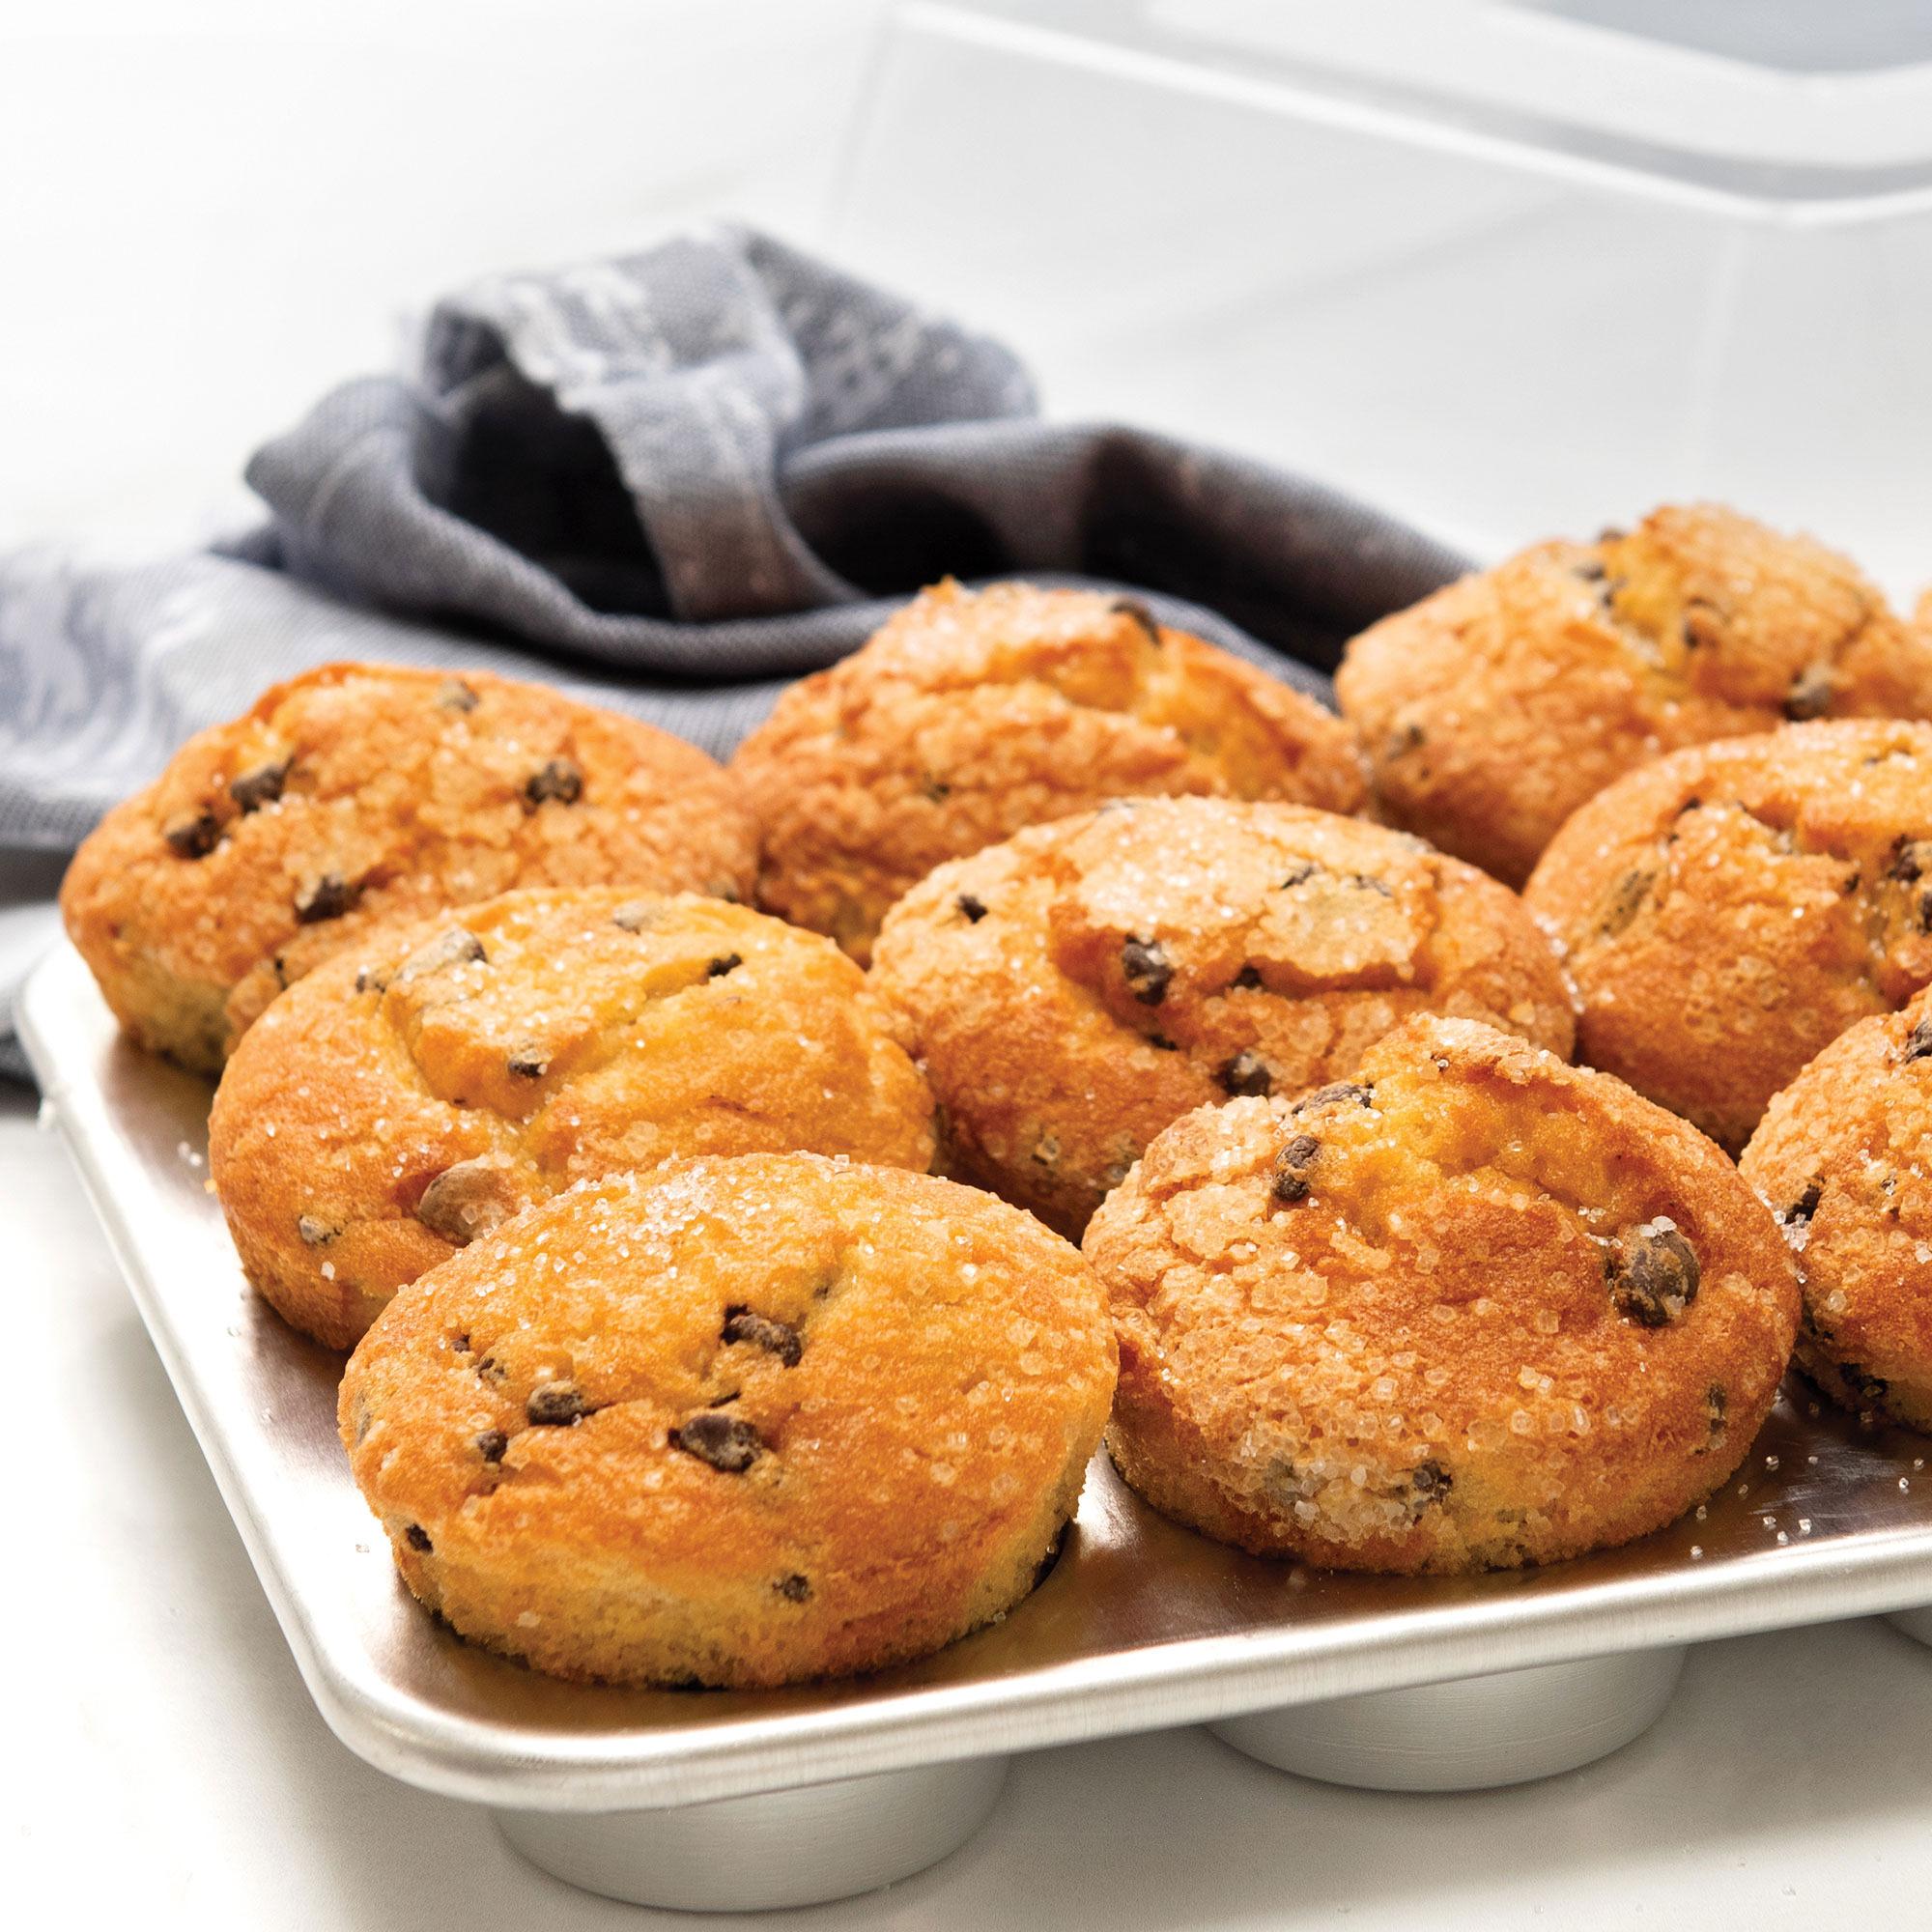 Nordic Ware Naturals Muffin Pan with High Dome Lid 12 Cup Image 3